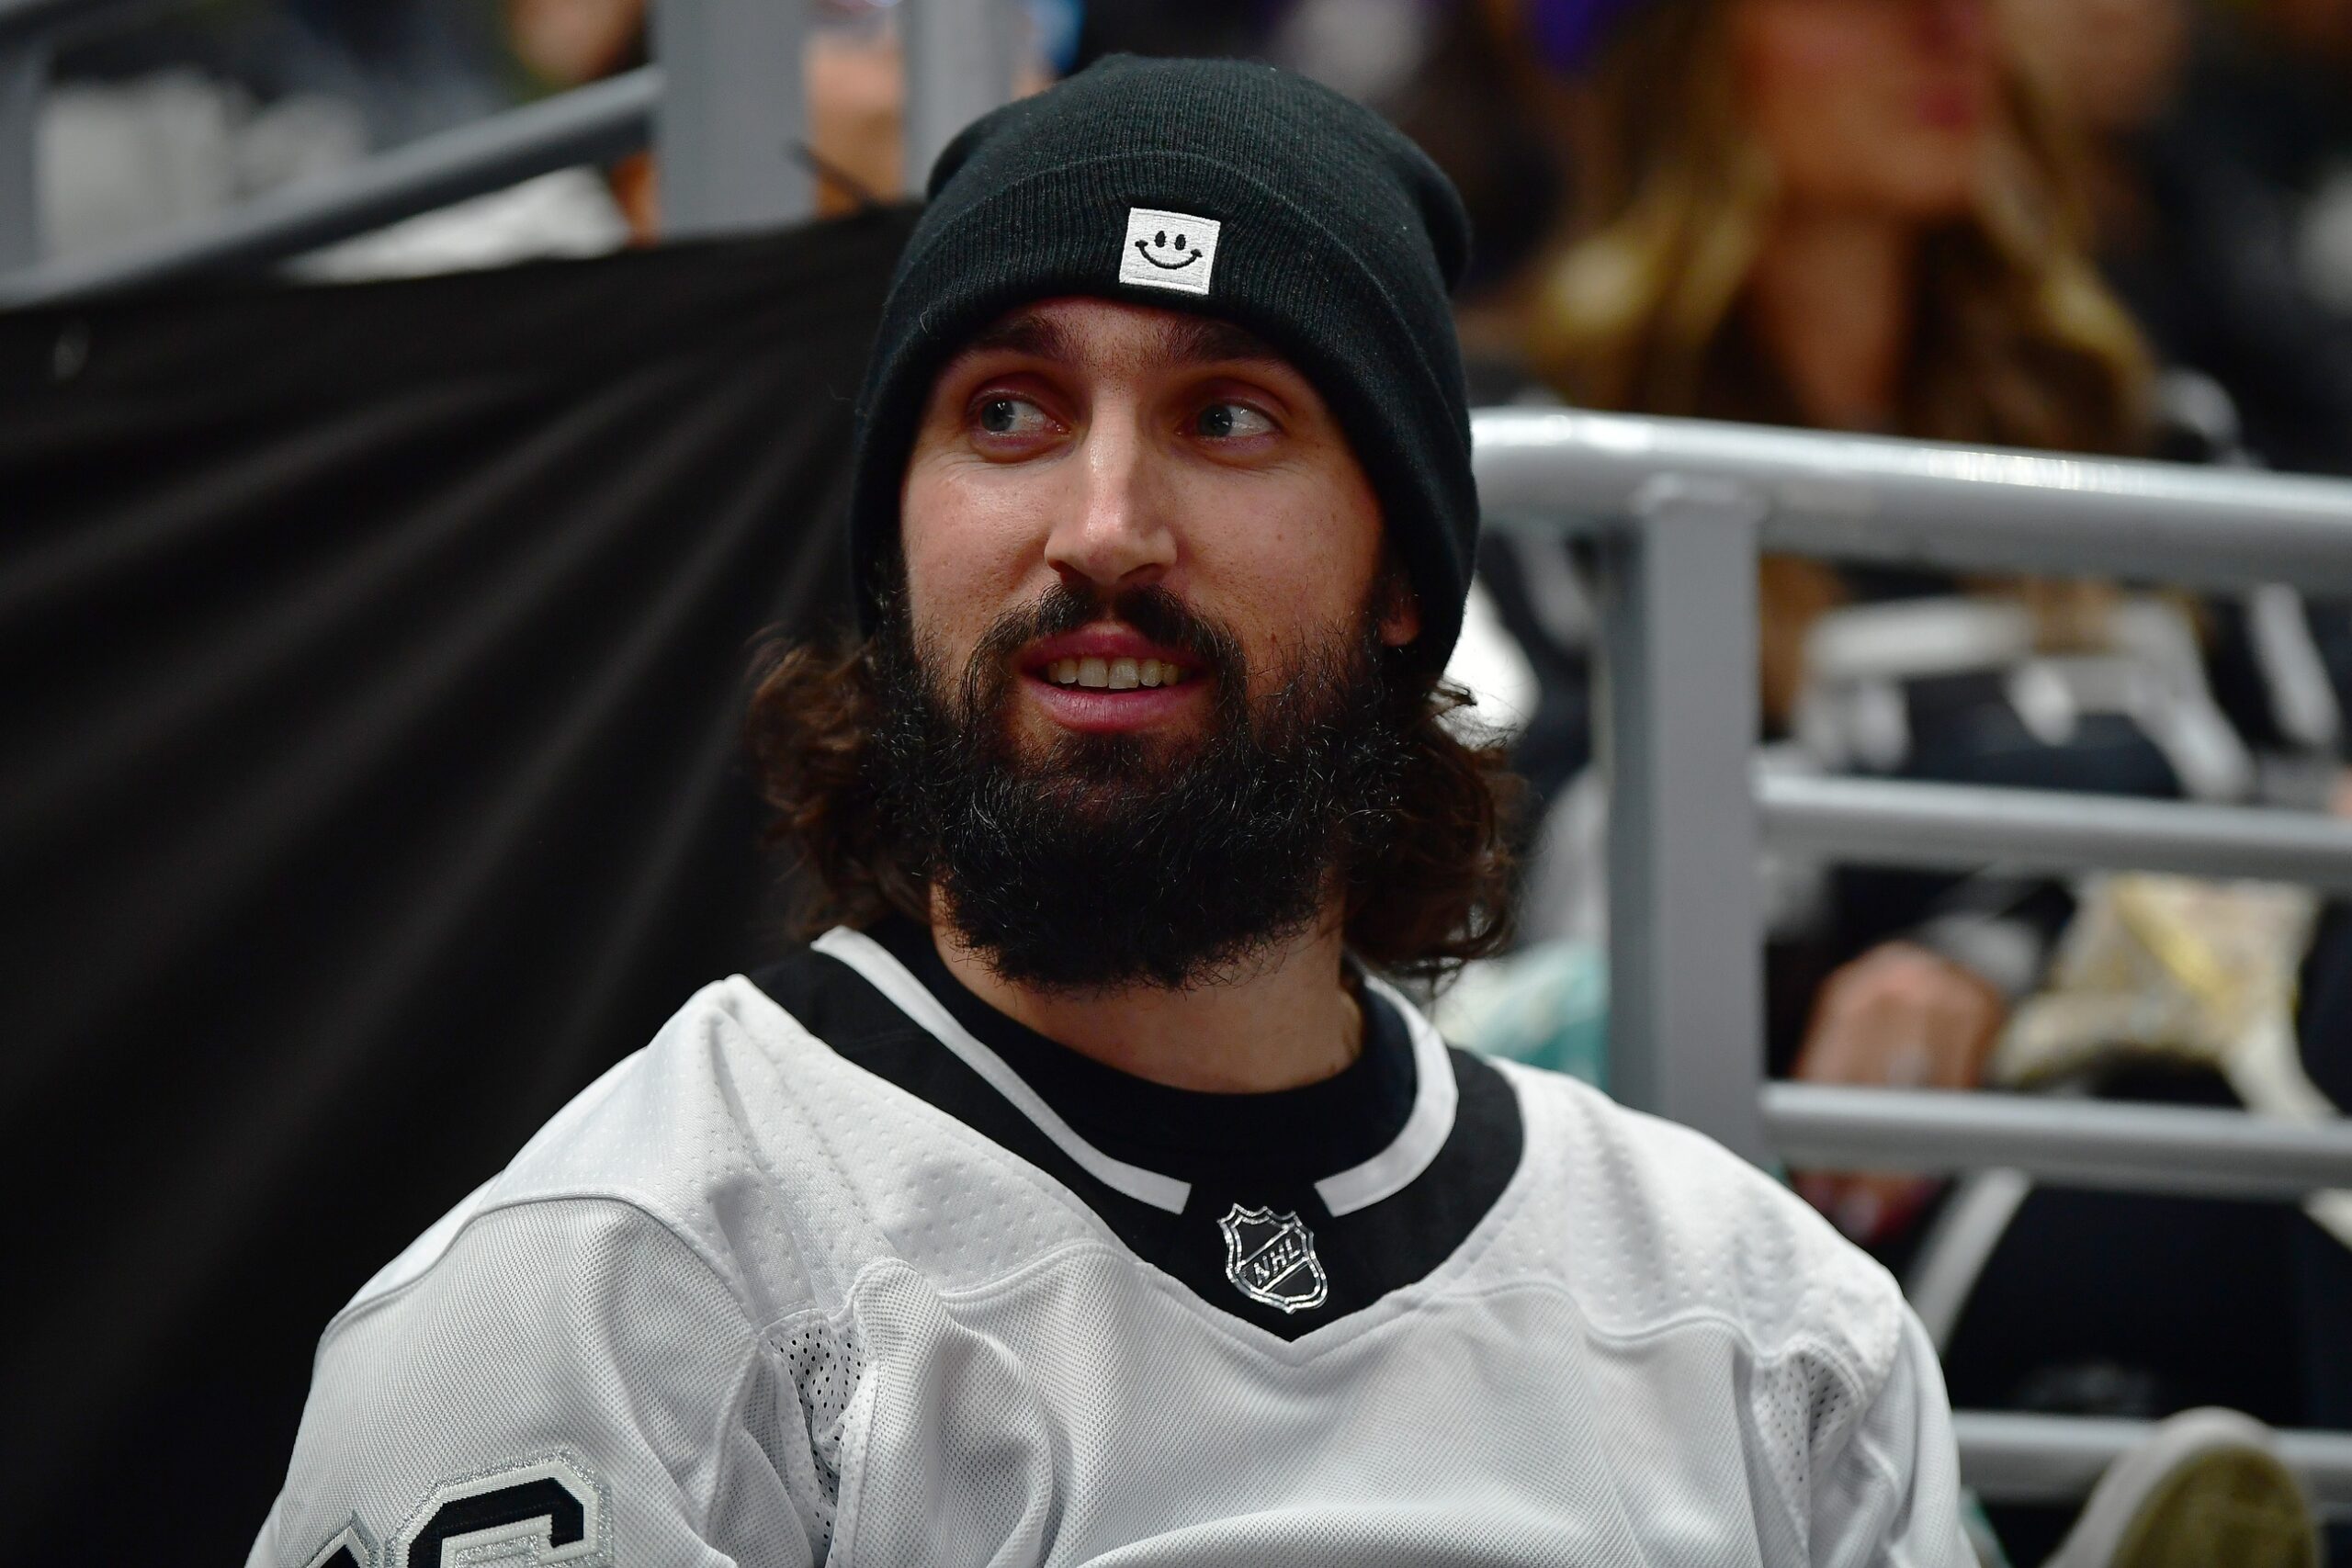 Dodgers: Watch Tony Gonsolin Drop the Puck at a LA Kings Game